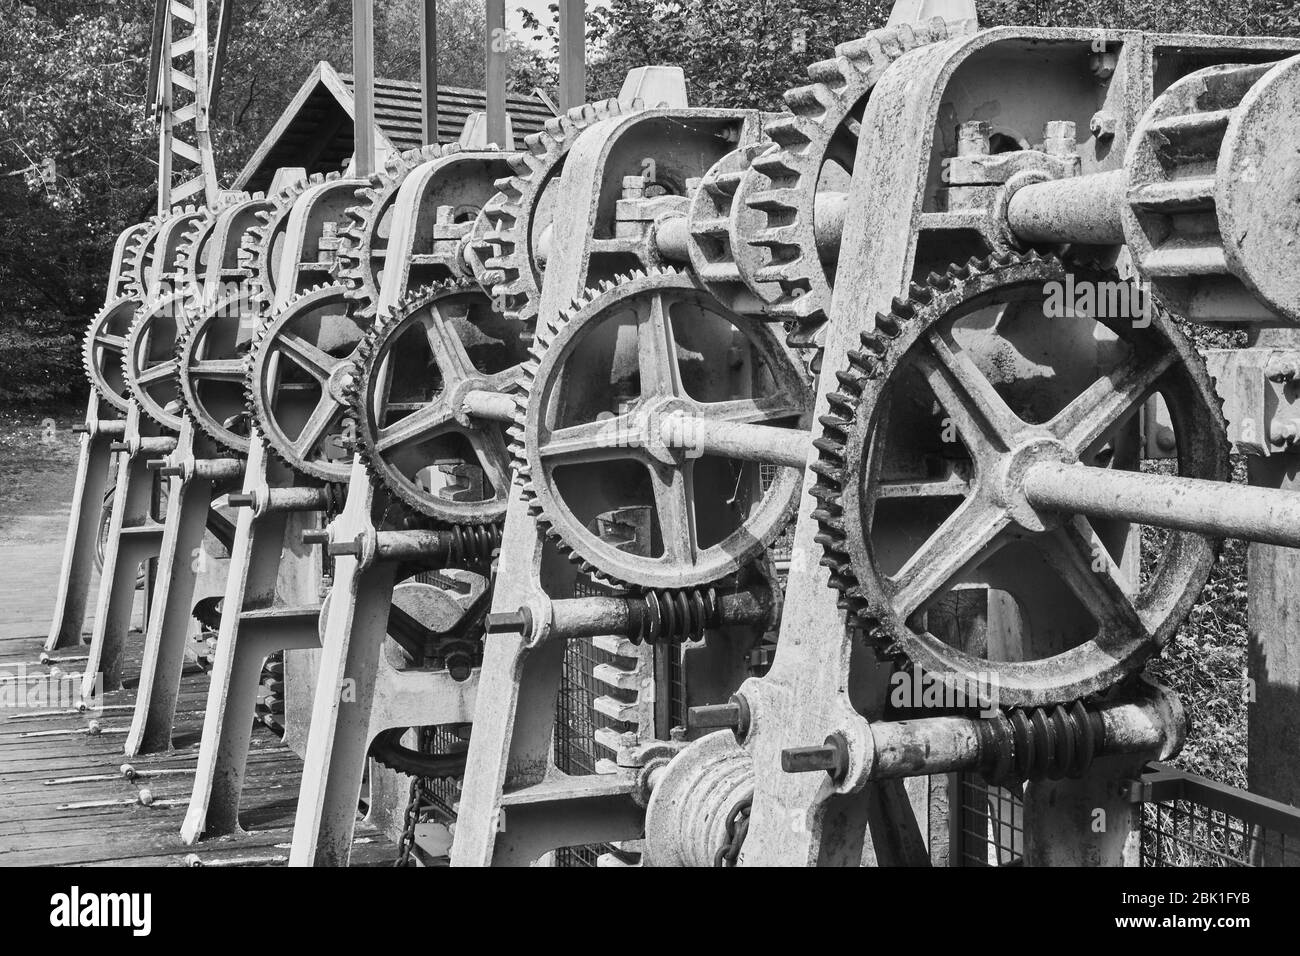 Gear wheels, toothed belts, chains, shafts and racks at a weir on the river Aller, Germany, black and white Stock Photo